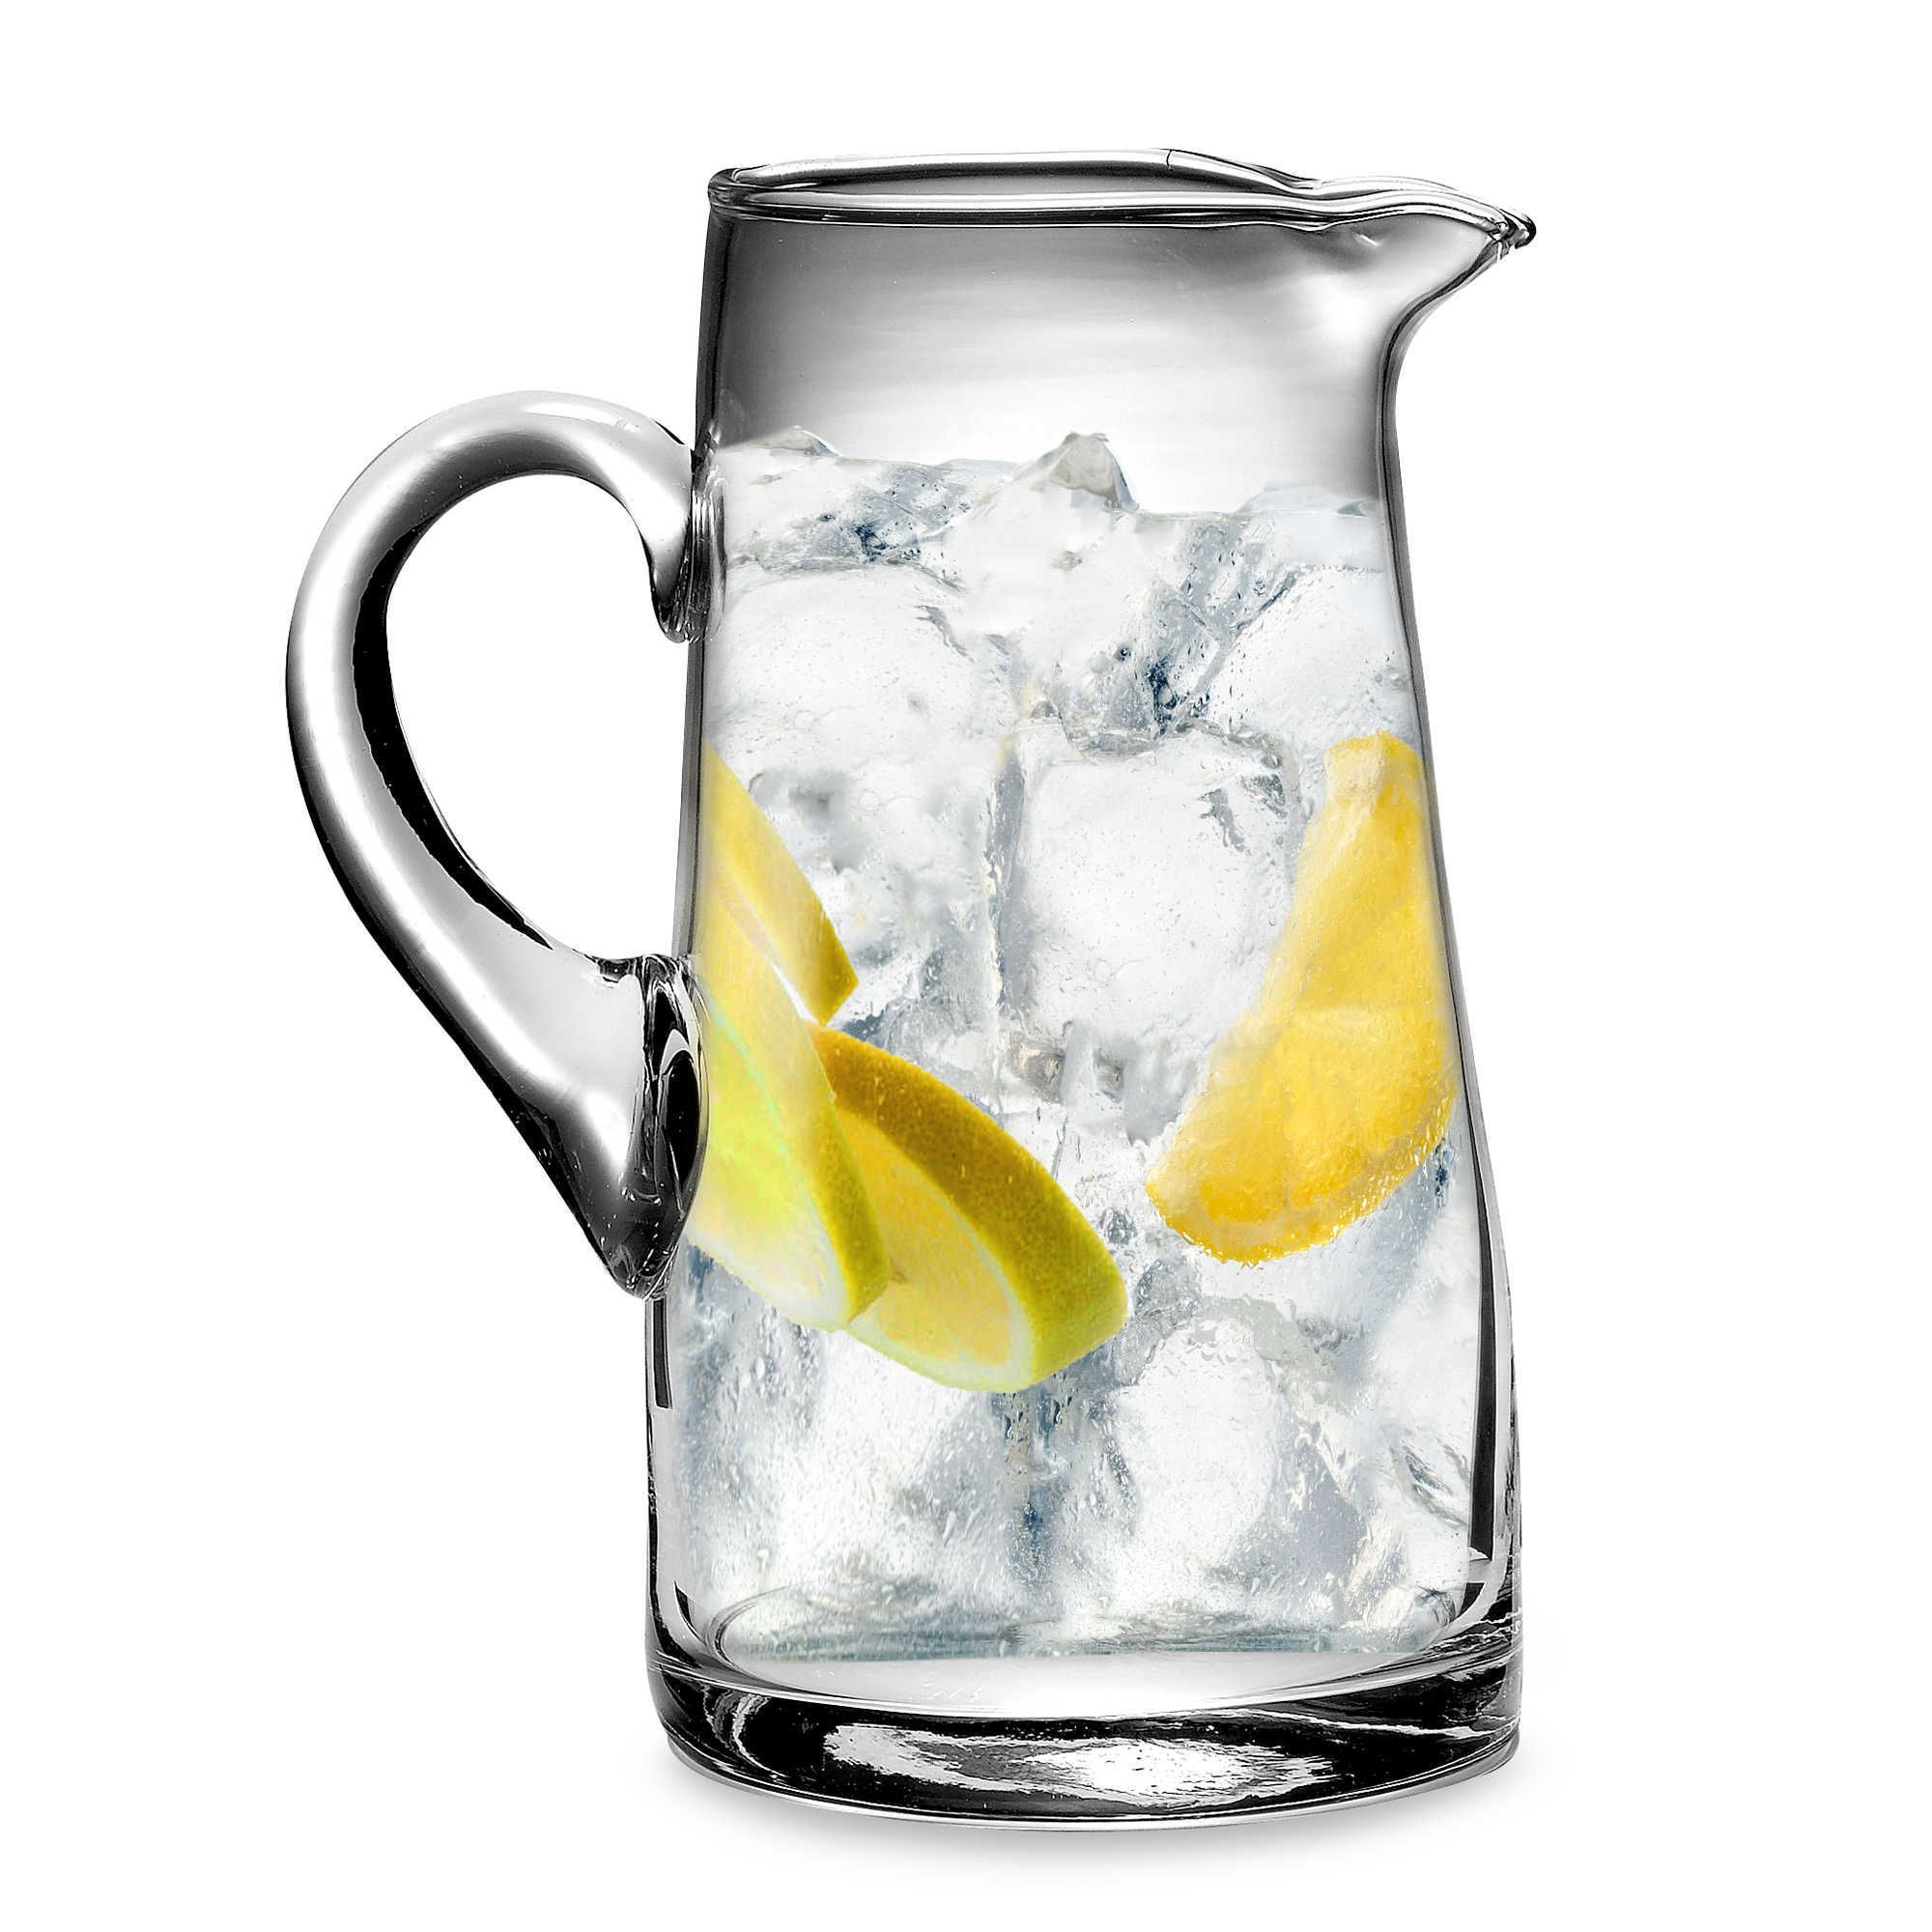 Libbey® Impressions 80-Ounce Pitcher | Bed Bath & Beyond